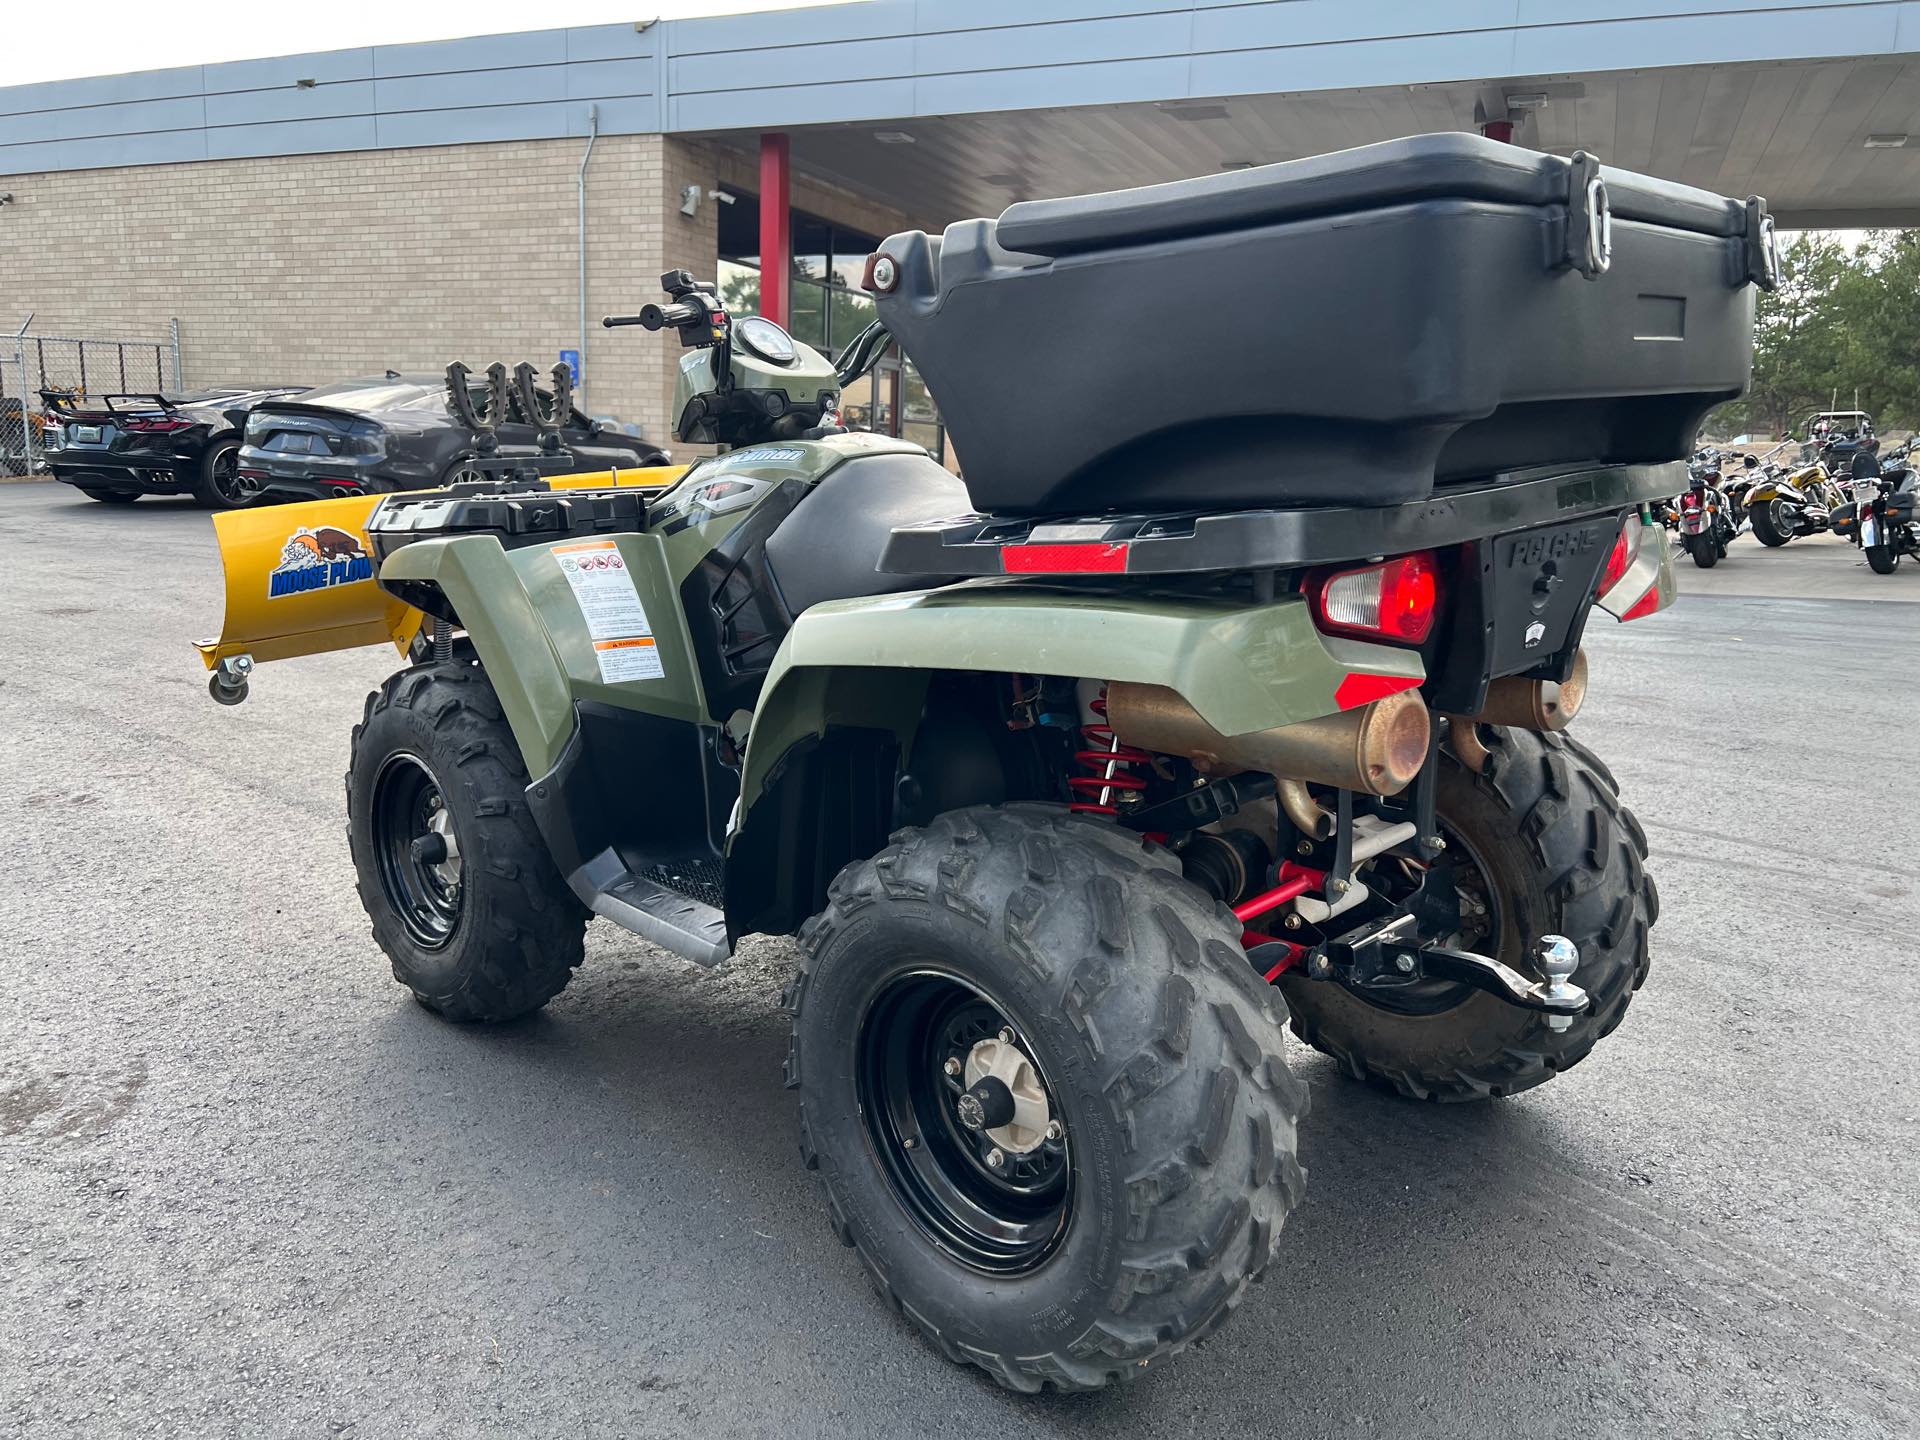 2006 Polaris Sportsman 800 Twin EFI at Aces Motorcycles - Fort Collins